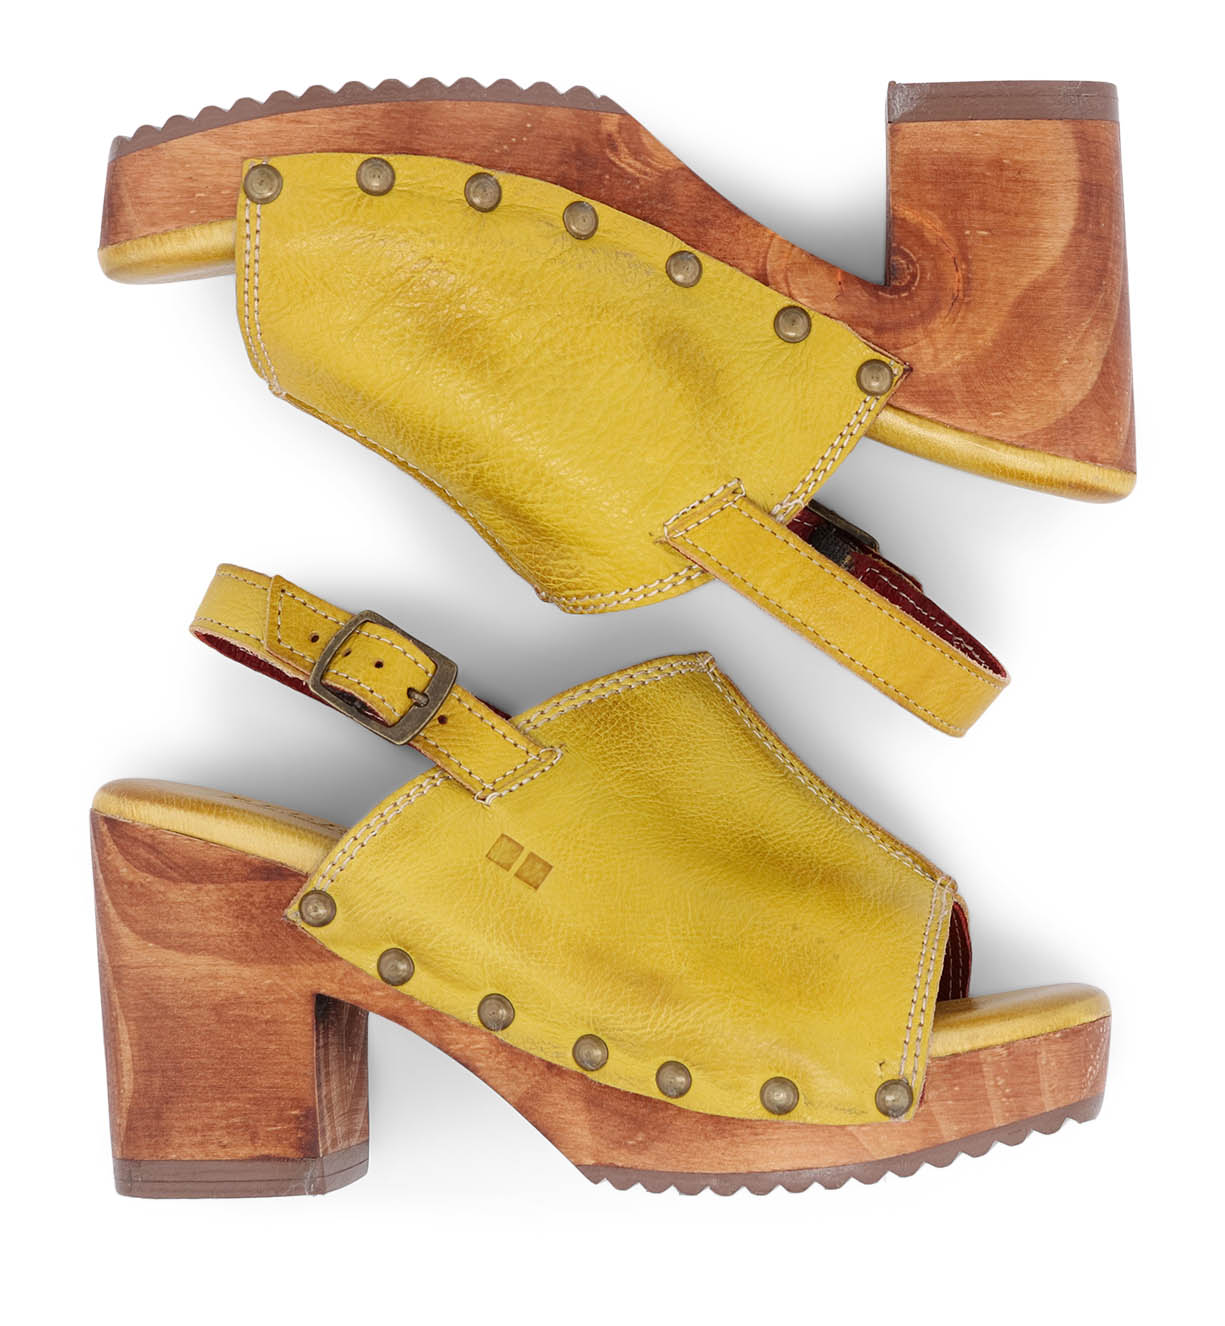 A pair of yellow Marie sandals with wooden heels by Bed Stu.